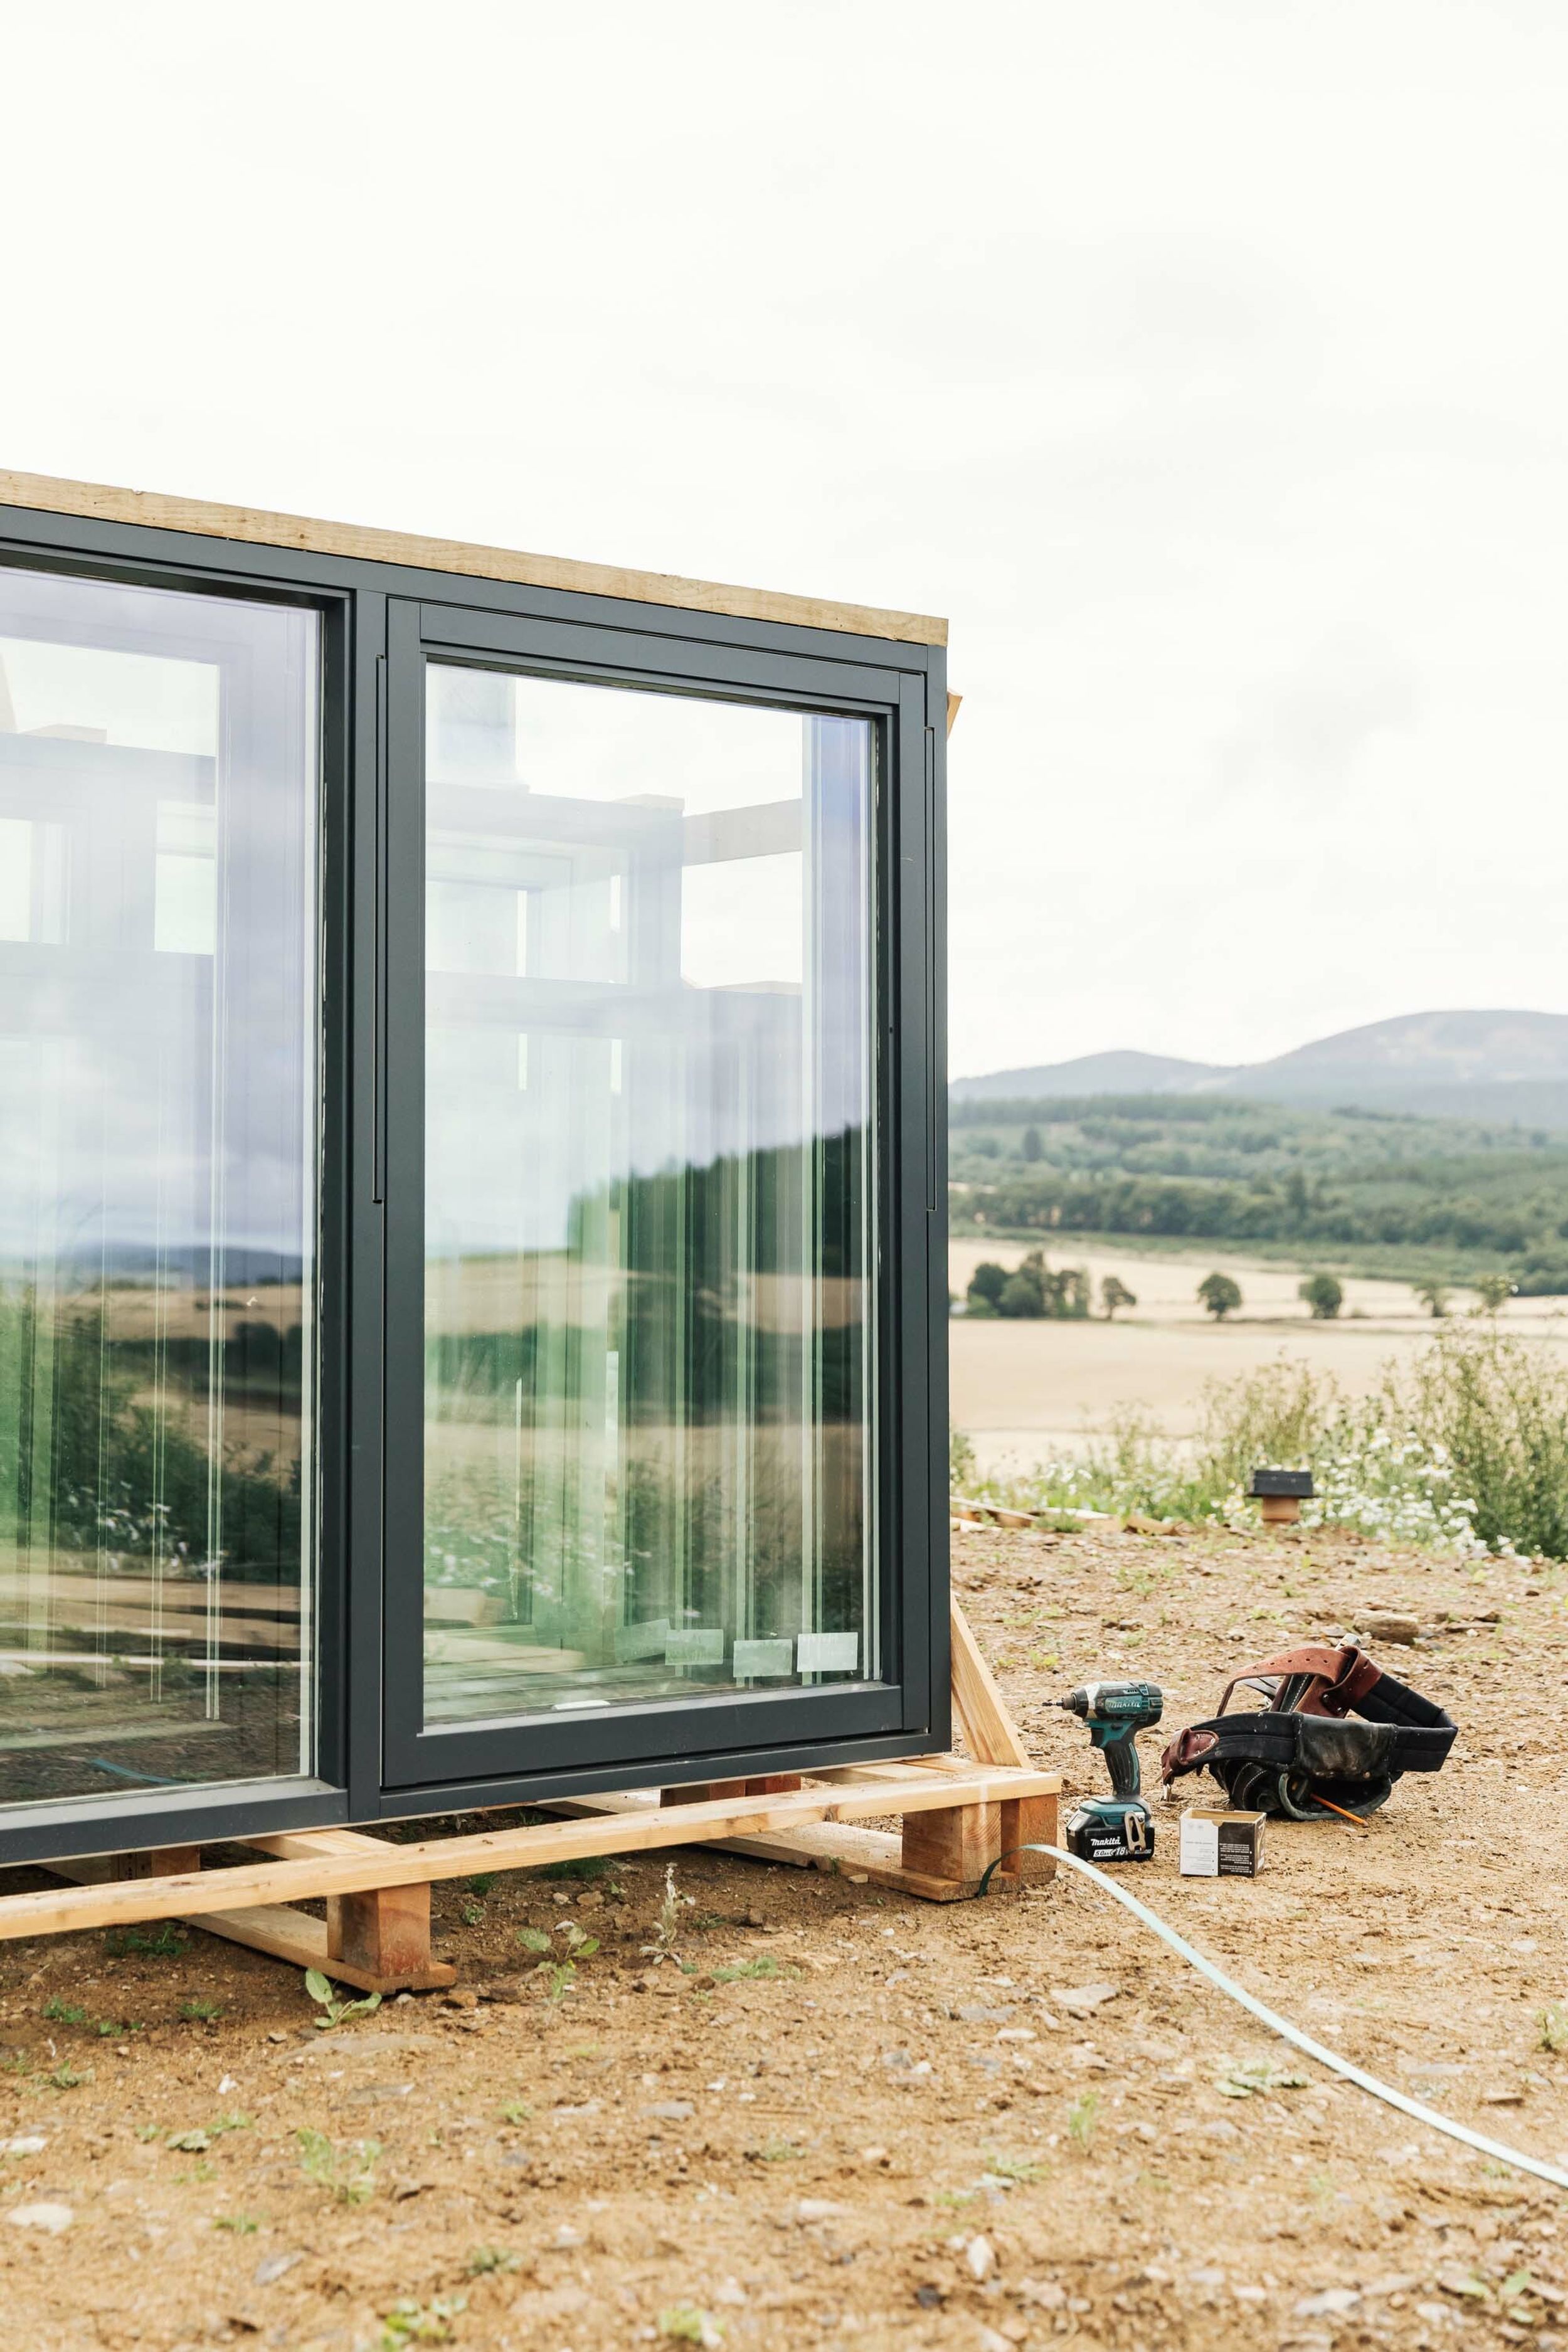 New Nordan windows are stacked on a crate, ready to be installed in a new build home. A drill and toolbelt lay on the bare earth beside the windows. In the distance, are barley fields, forest and hills.